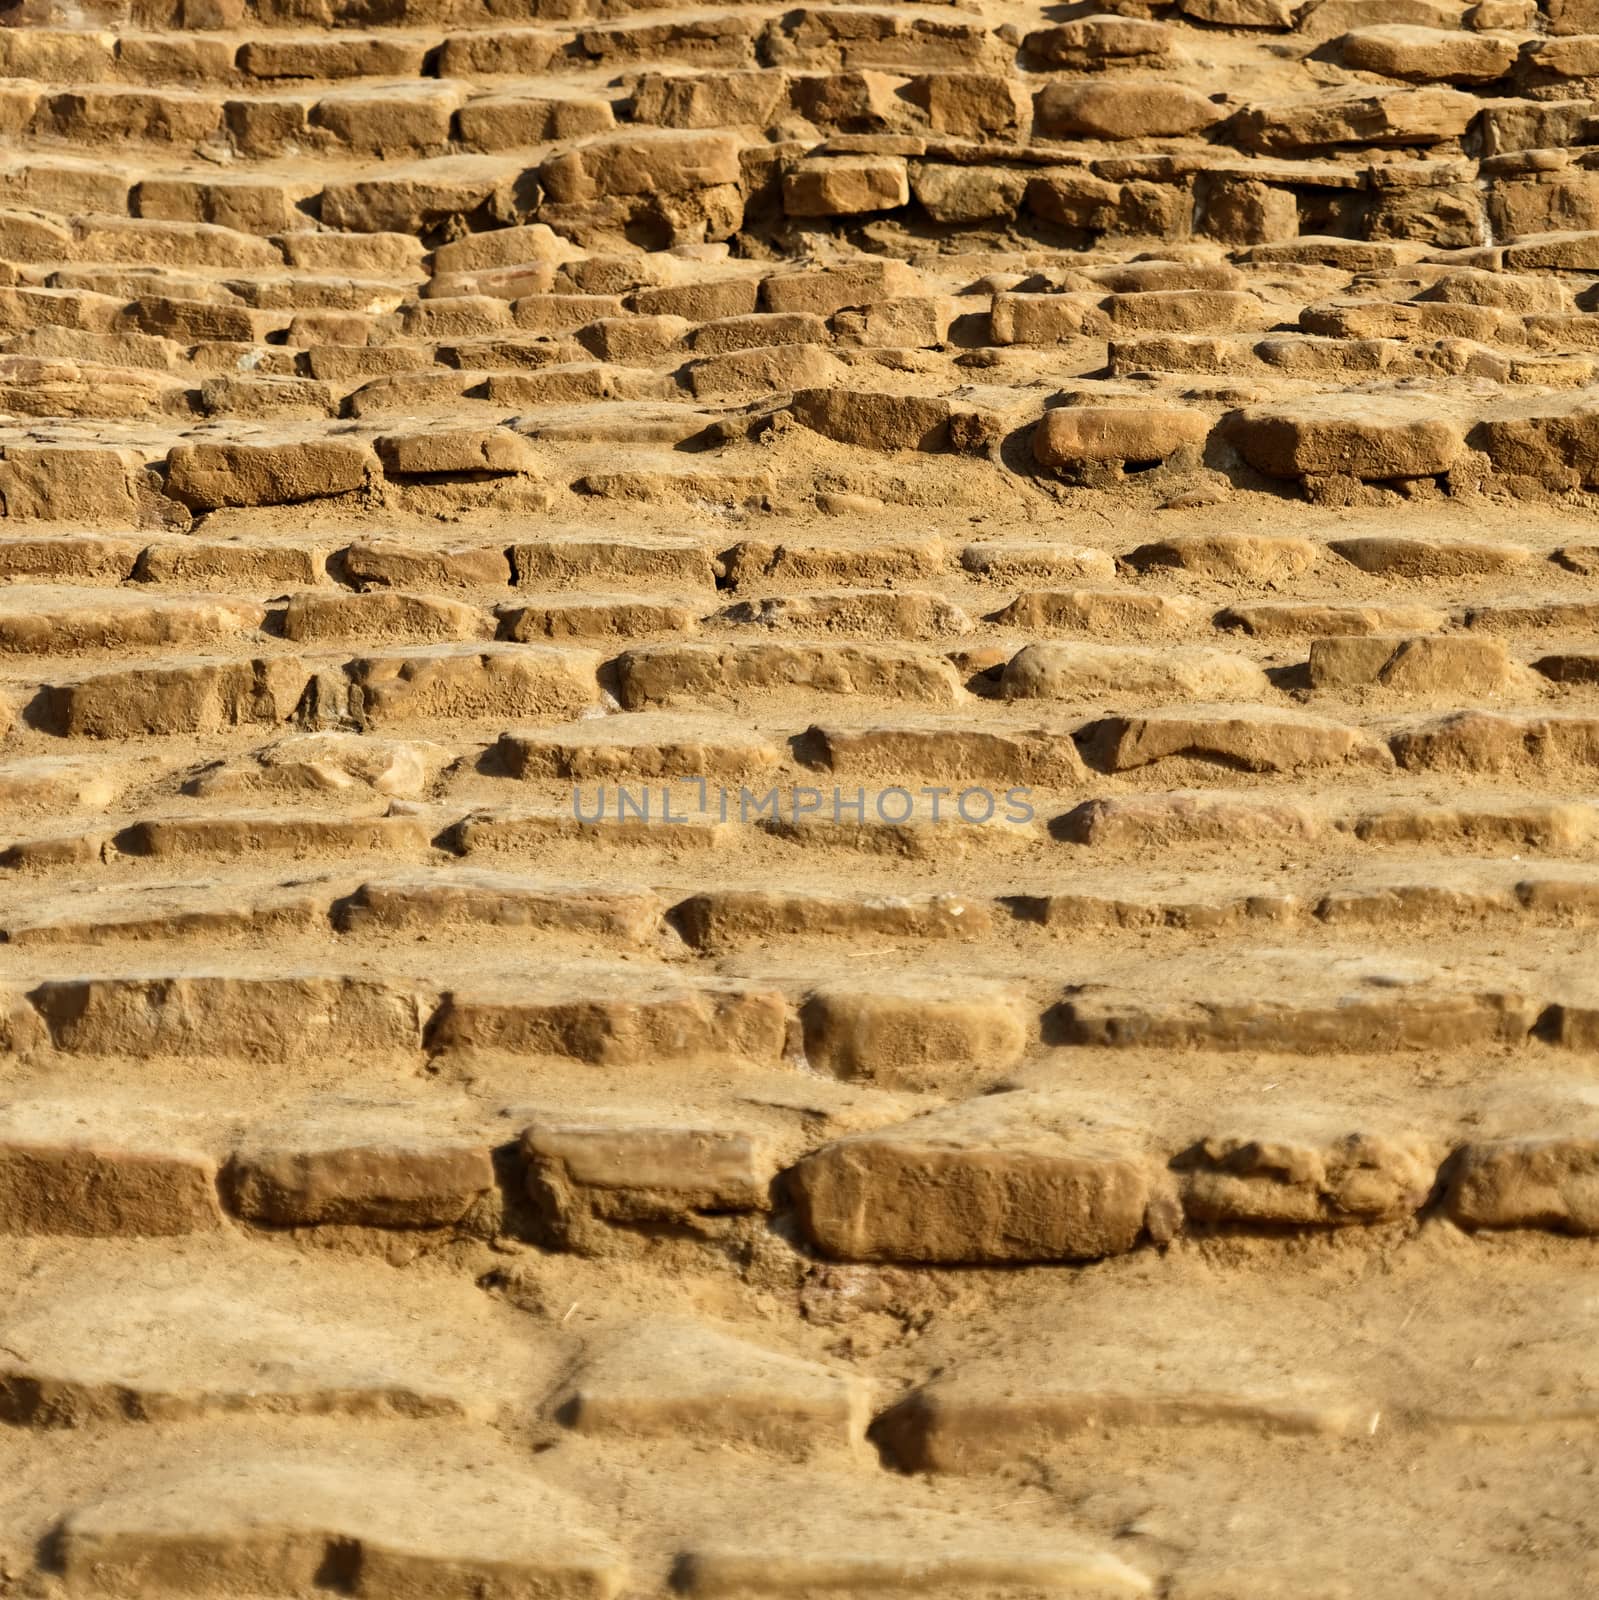 Stairs with treads of single hewn sandstone blocks leading to the beach of Amman at the Dead Sea, Jordan